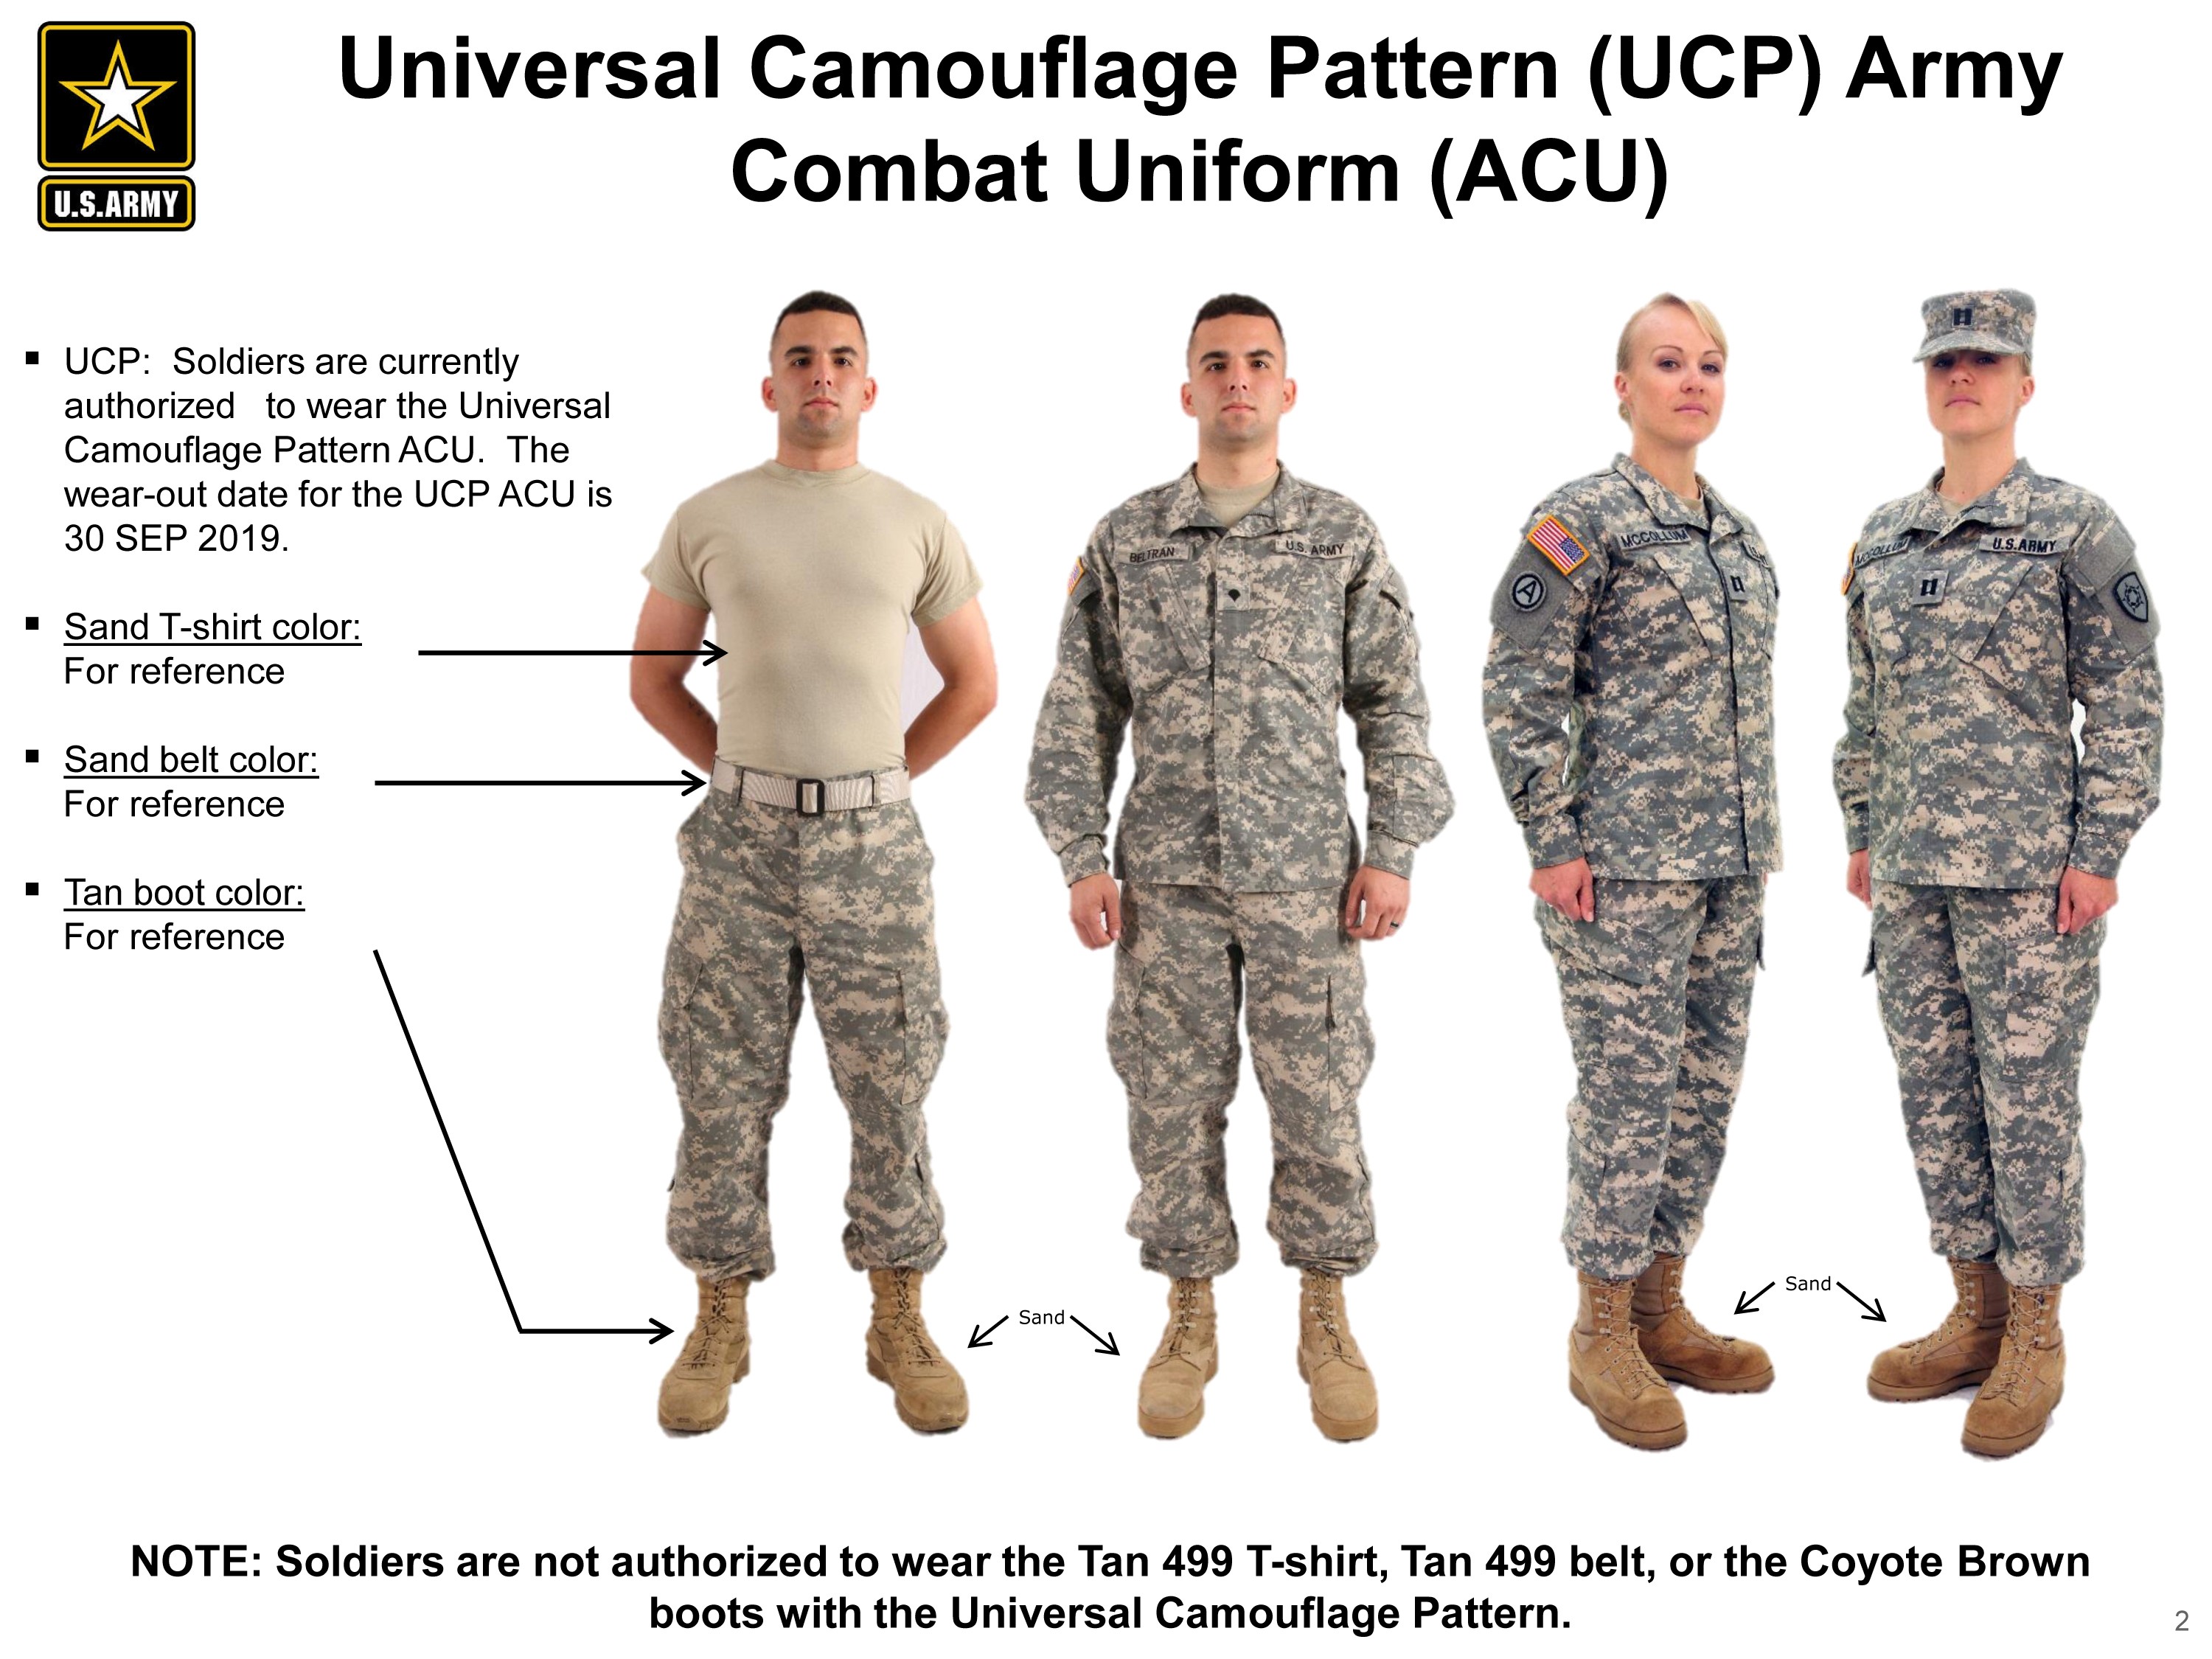 Operational Camouflage Pattern Army Combat Uniforms available July 1 ...